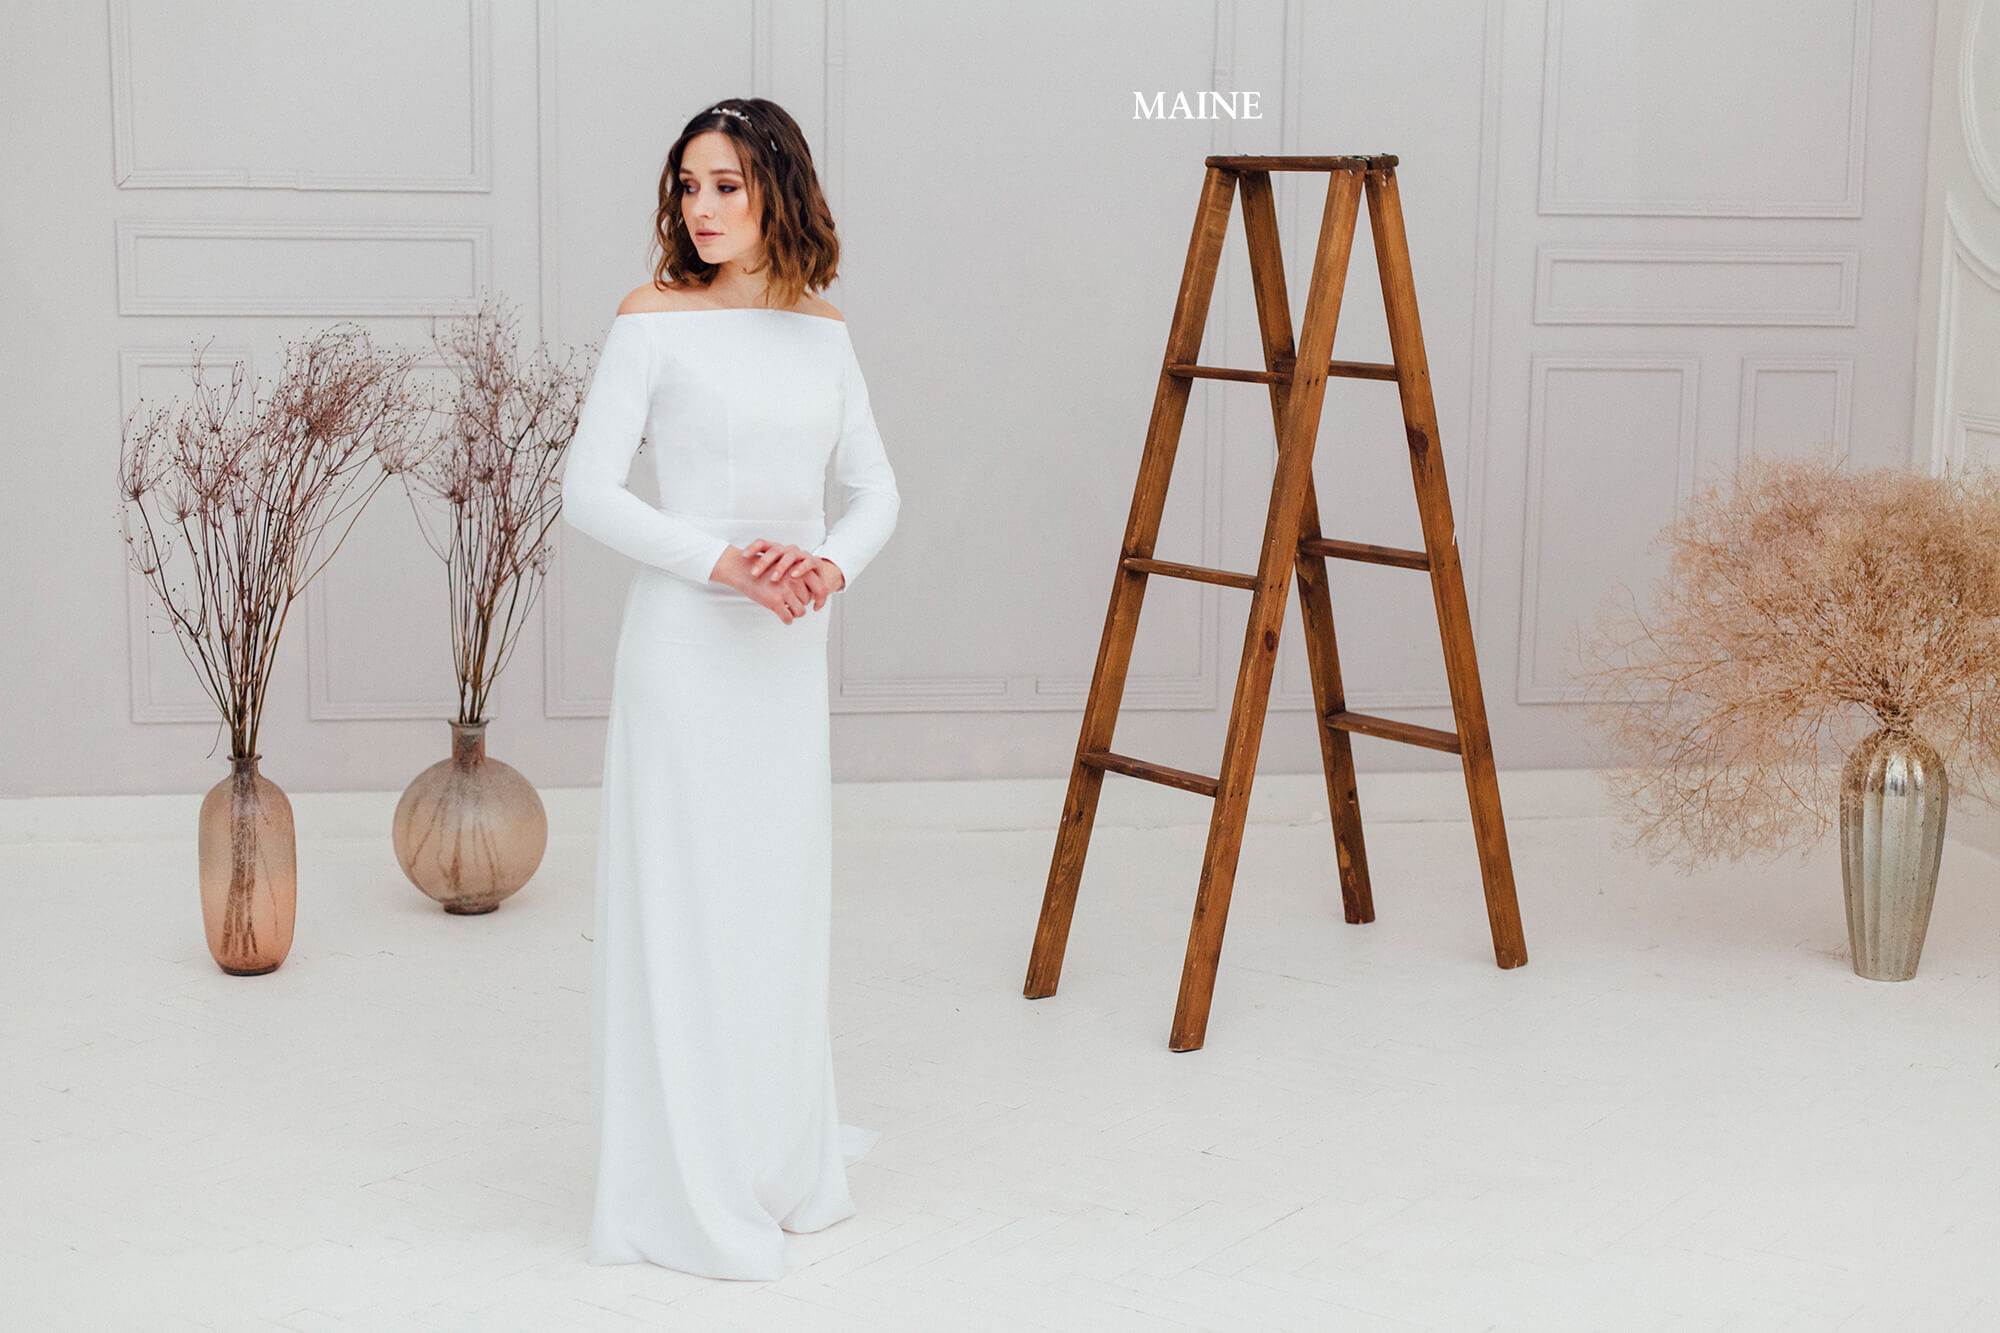 MAINE - wedding dress "Refined Elegance" collection